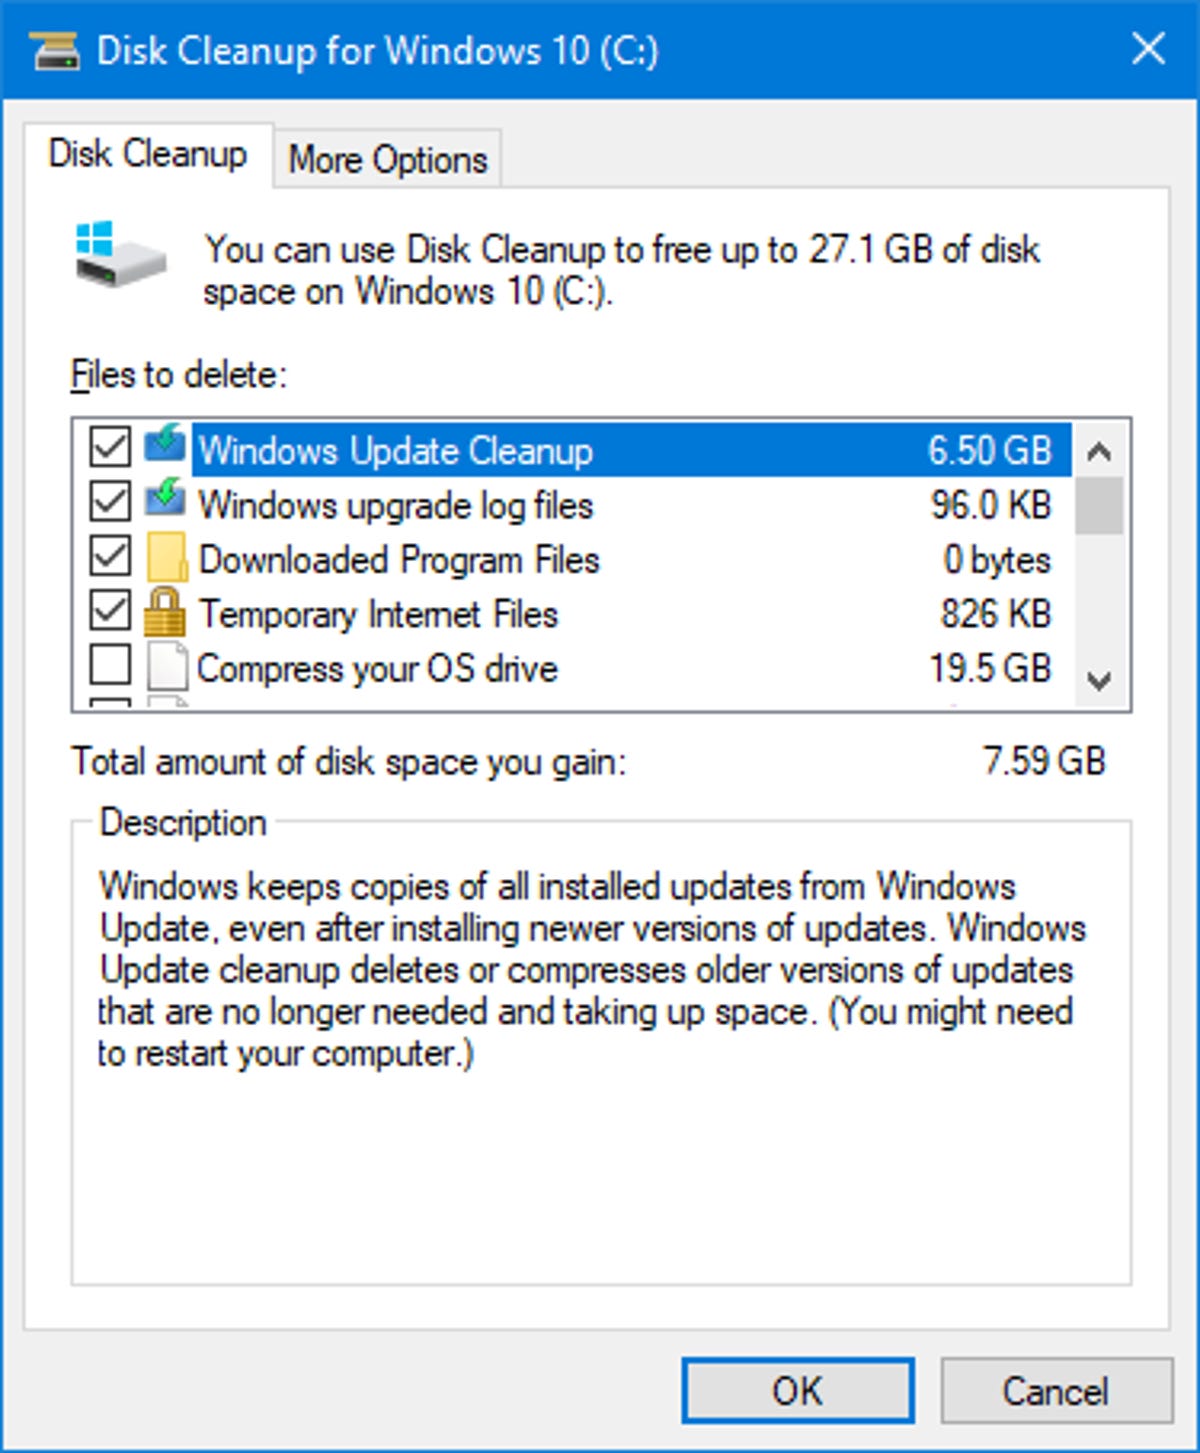 03-cleaning-up-system-files-windows-10